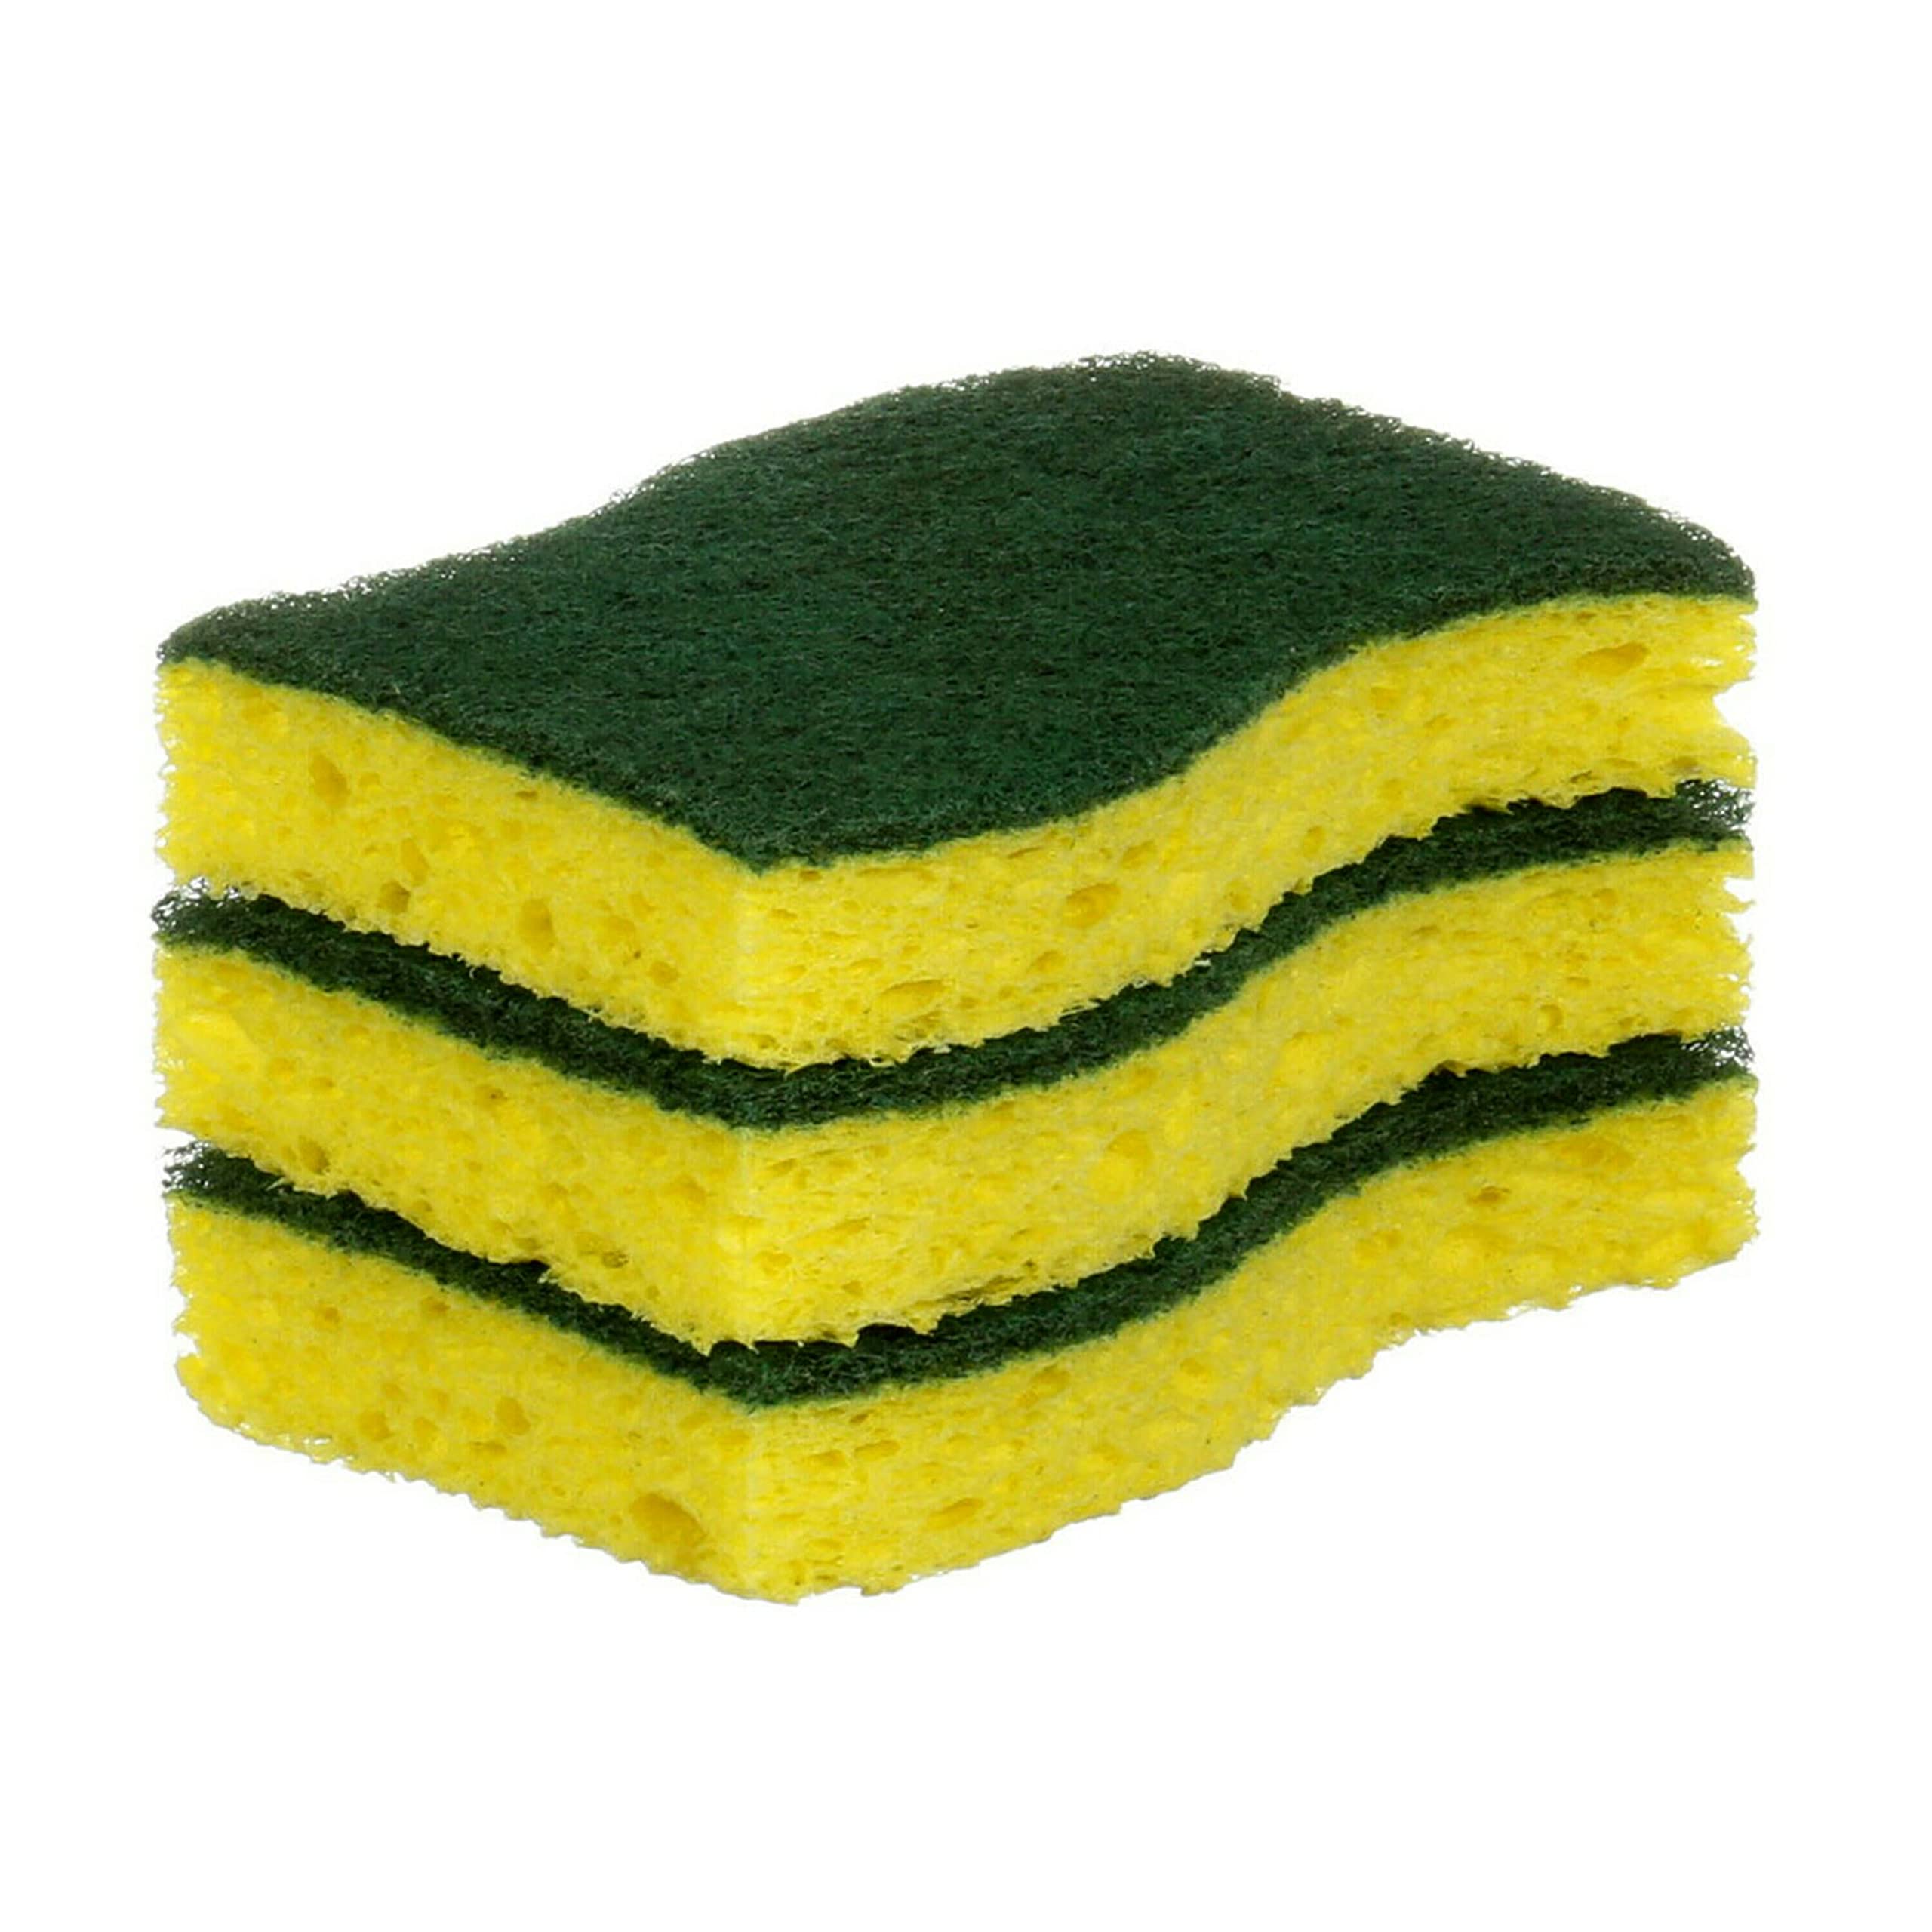 Scotch-Brite Heavy Duty Scrub Sponges, Sponges for Cleaning Kitchen and Household, Heavy Duty Sponges Safe for Non-Coated Cookware, 24 Scrubbing Sponges